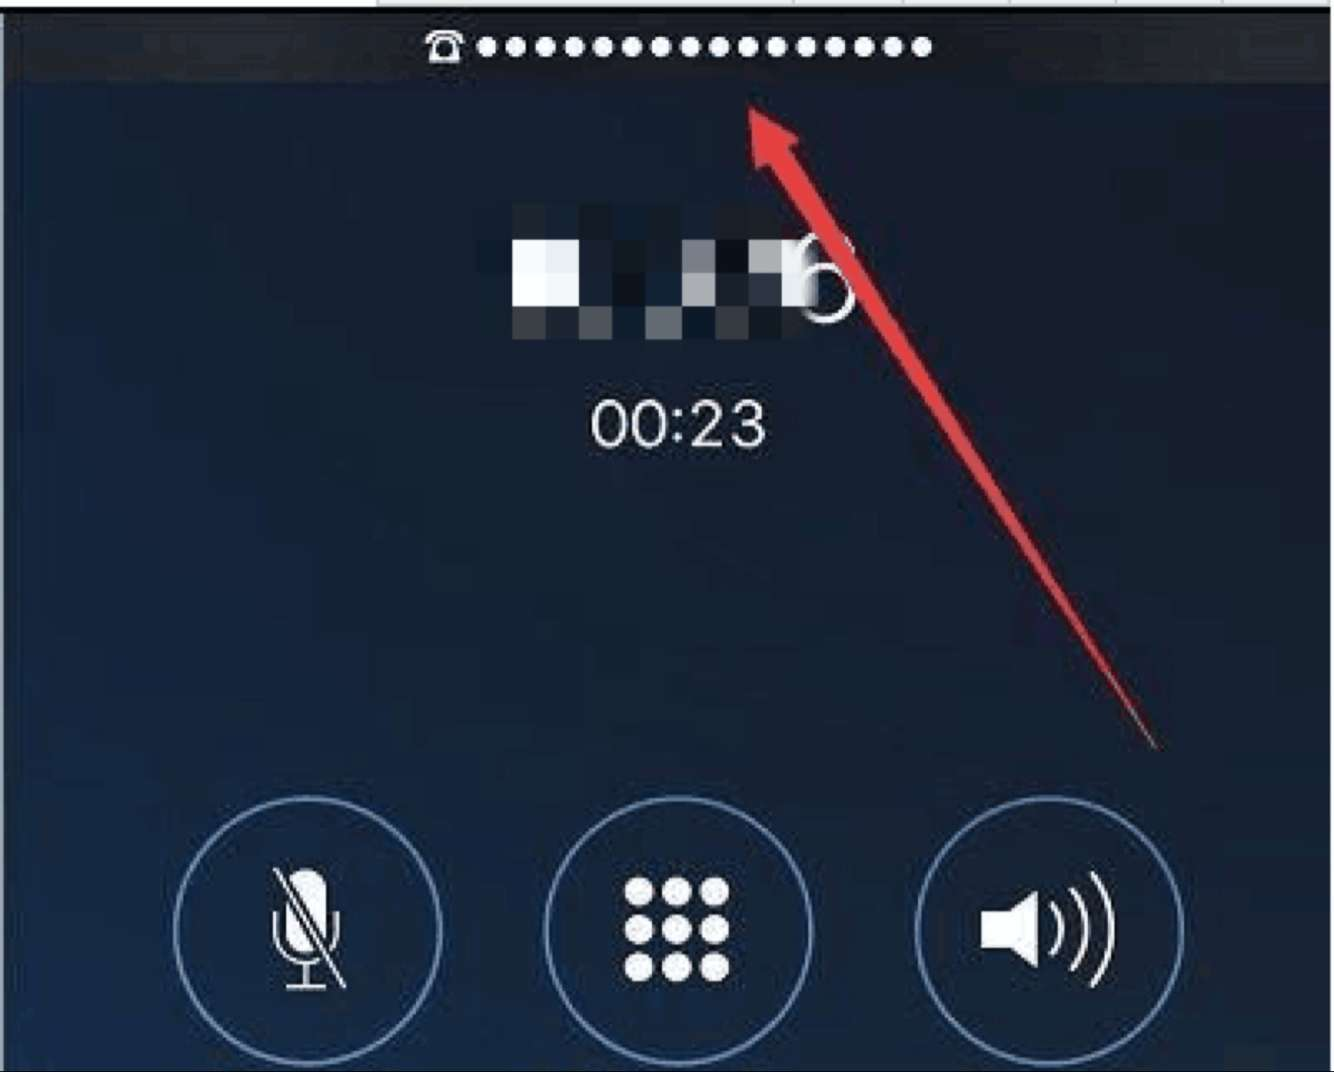 How to Improve iPhone7’s Call Quality?